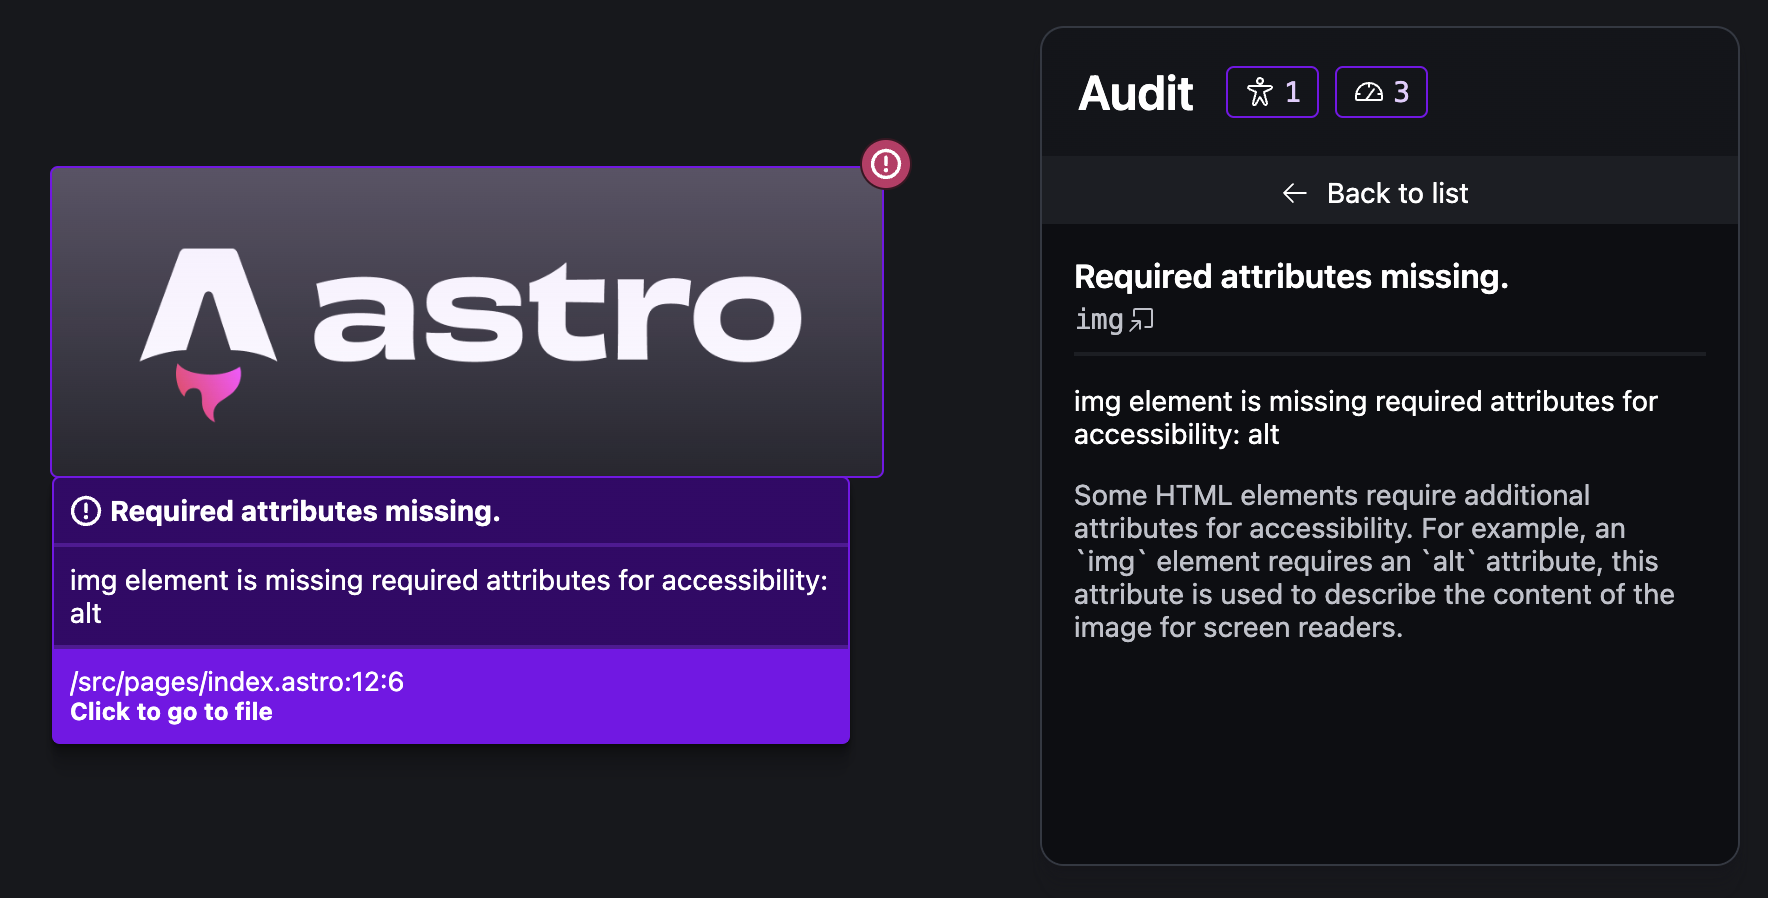 The new audit panel in Astro 4.5. Shows the problem title, a short message explaining the problem, and a longer description as to why this is a problem.